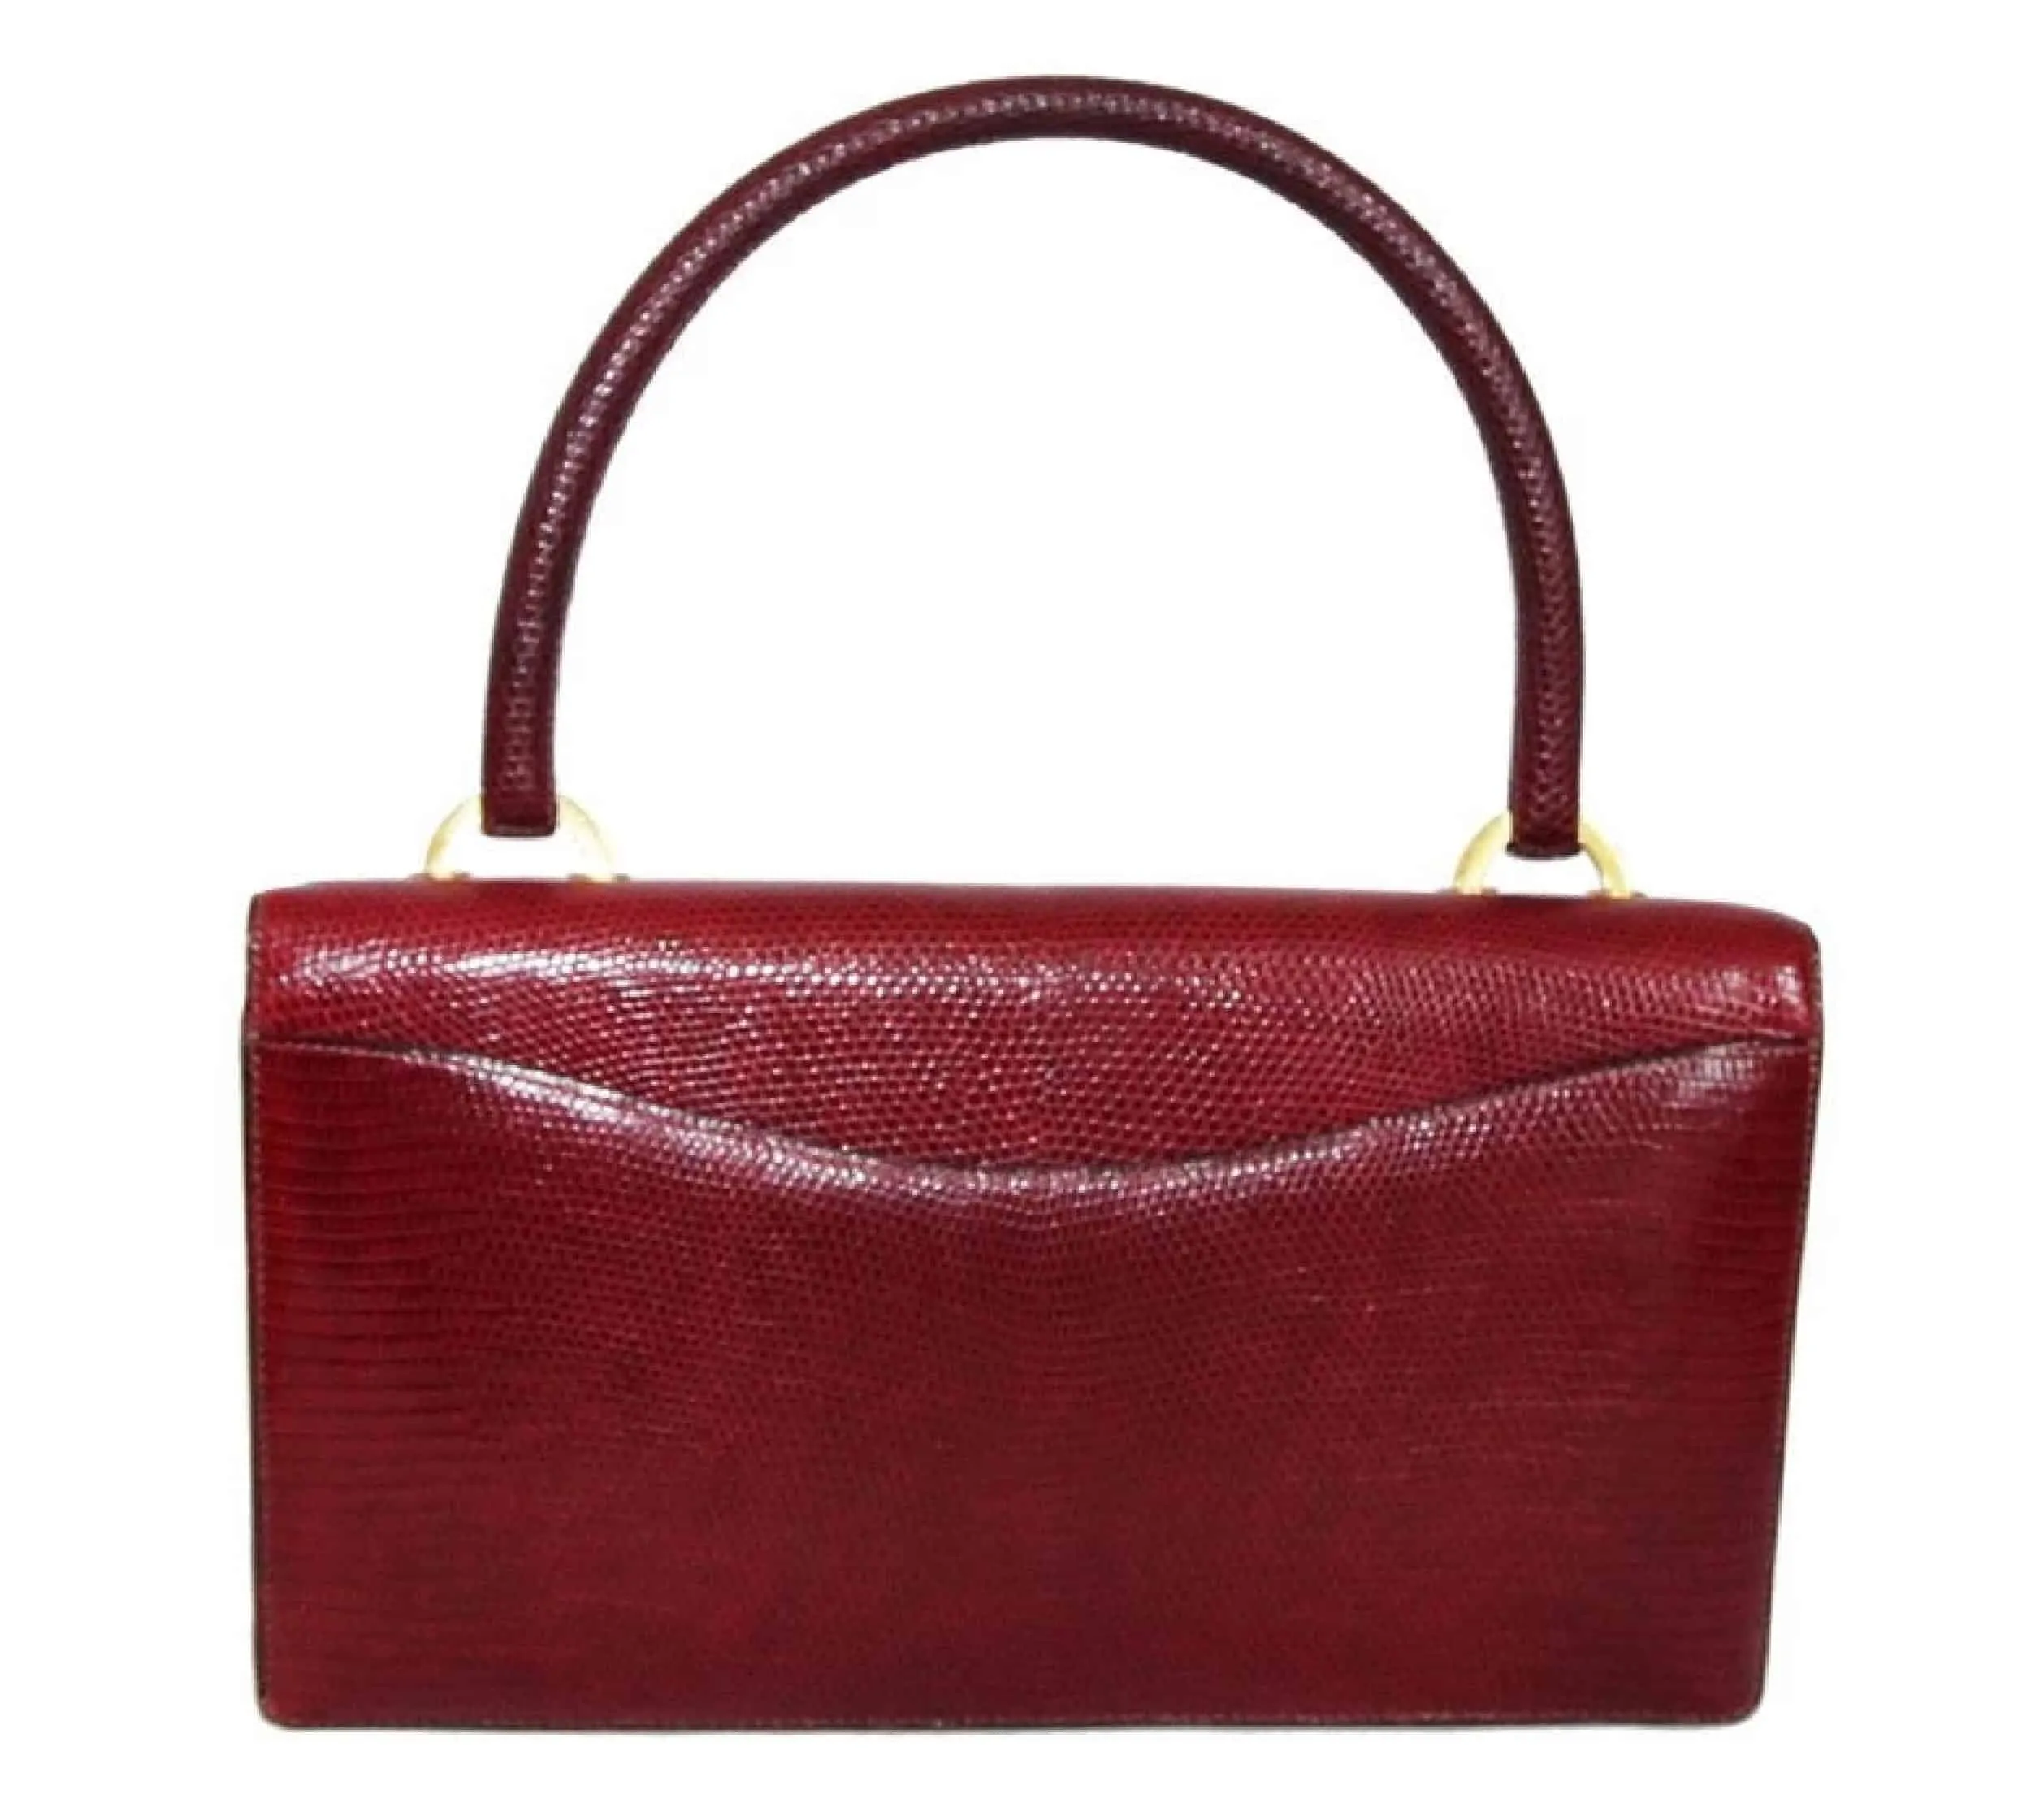 GUCCI, BURGUNDY VINTAGE BAG IN LIZARD, c.1960s, Handbags and Accessories, 2020